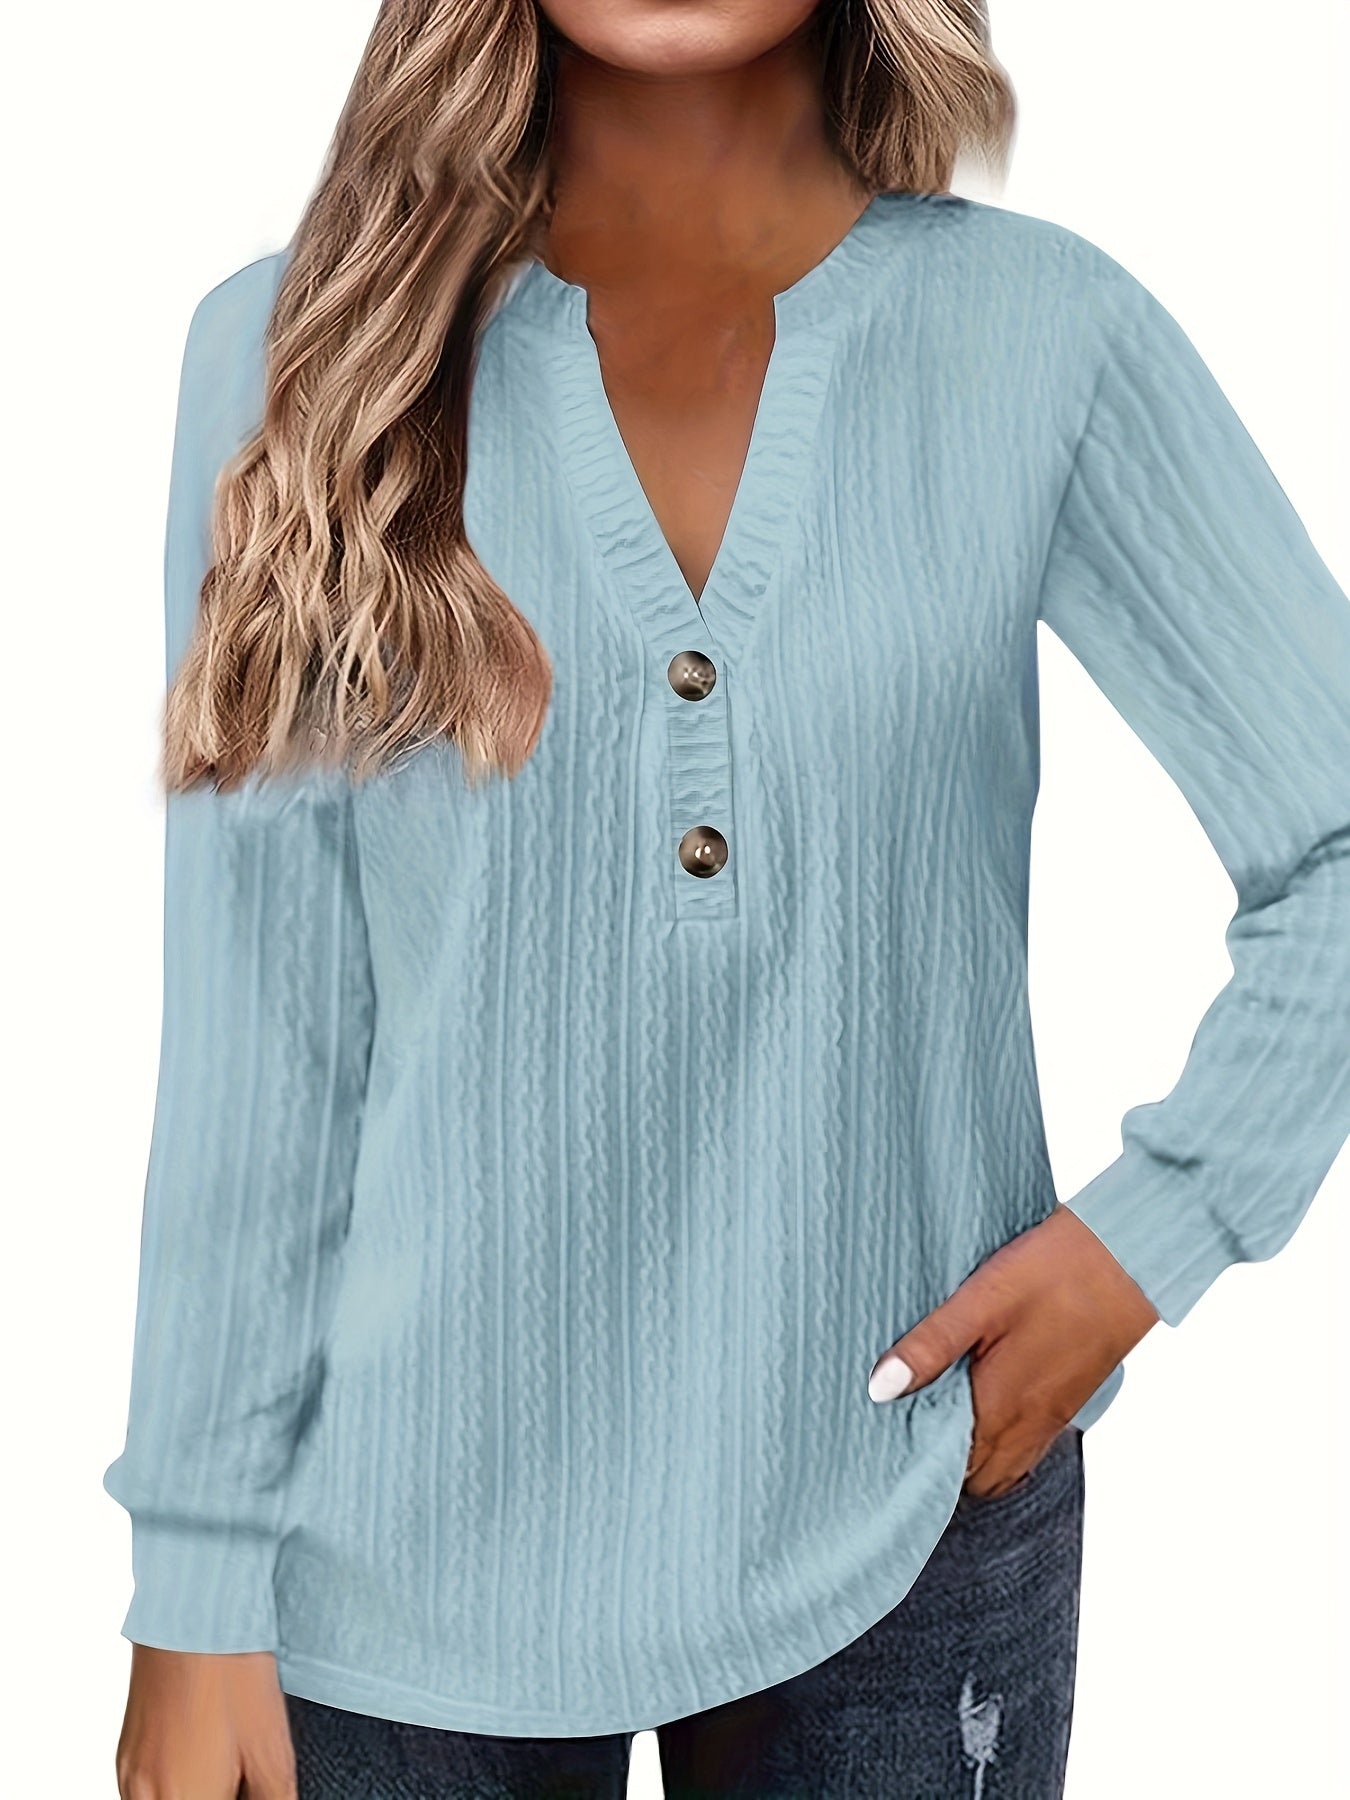 Plus Size Casual Top, Women's Plus Solid Cable Long Sleeve Button Decor V Neck Slight Stretch Top